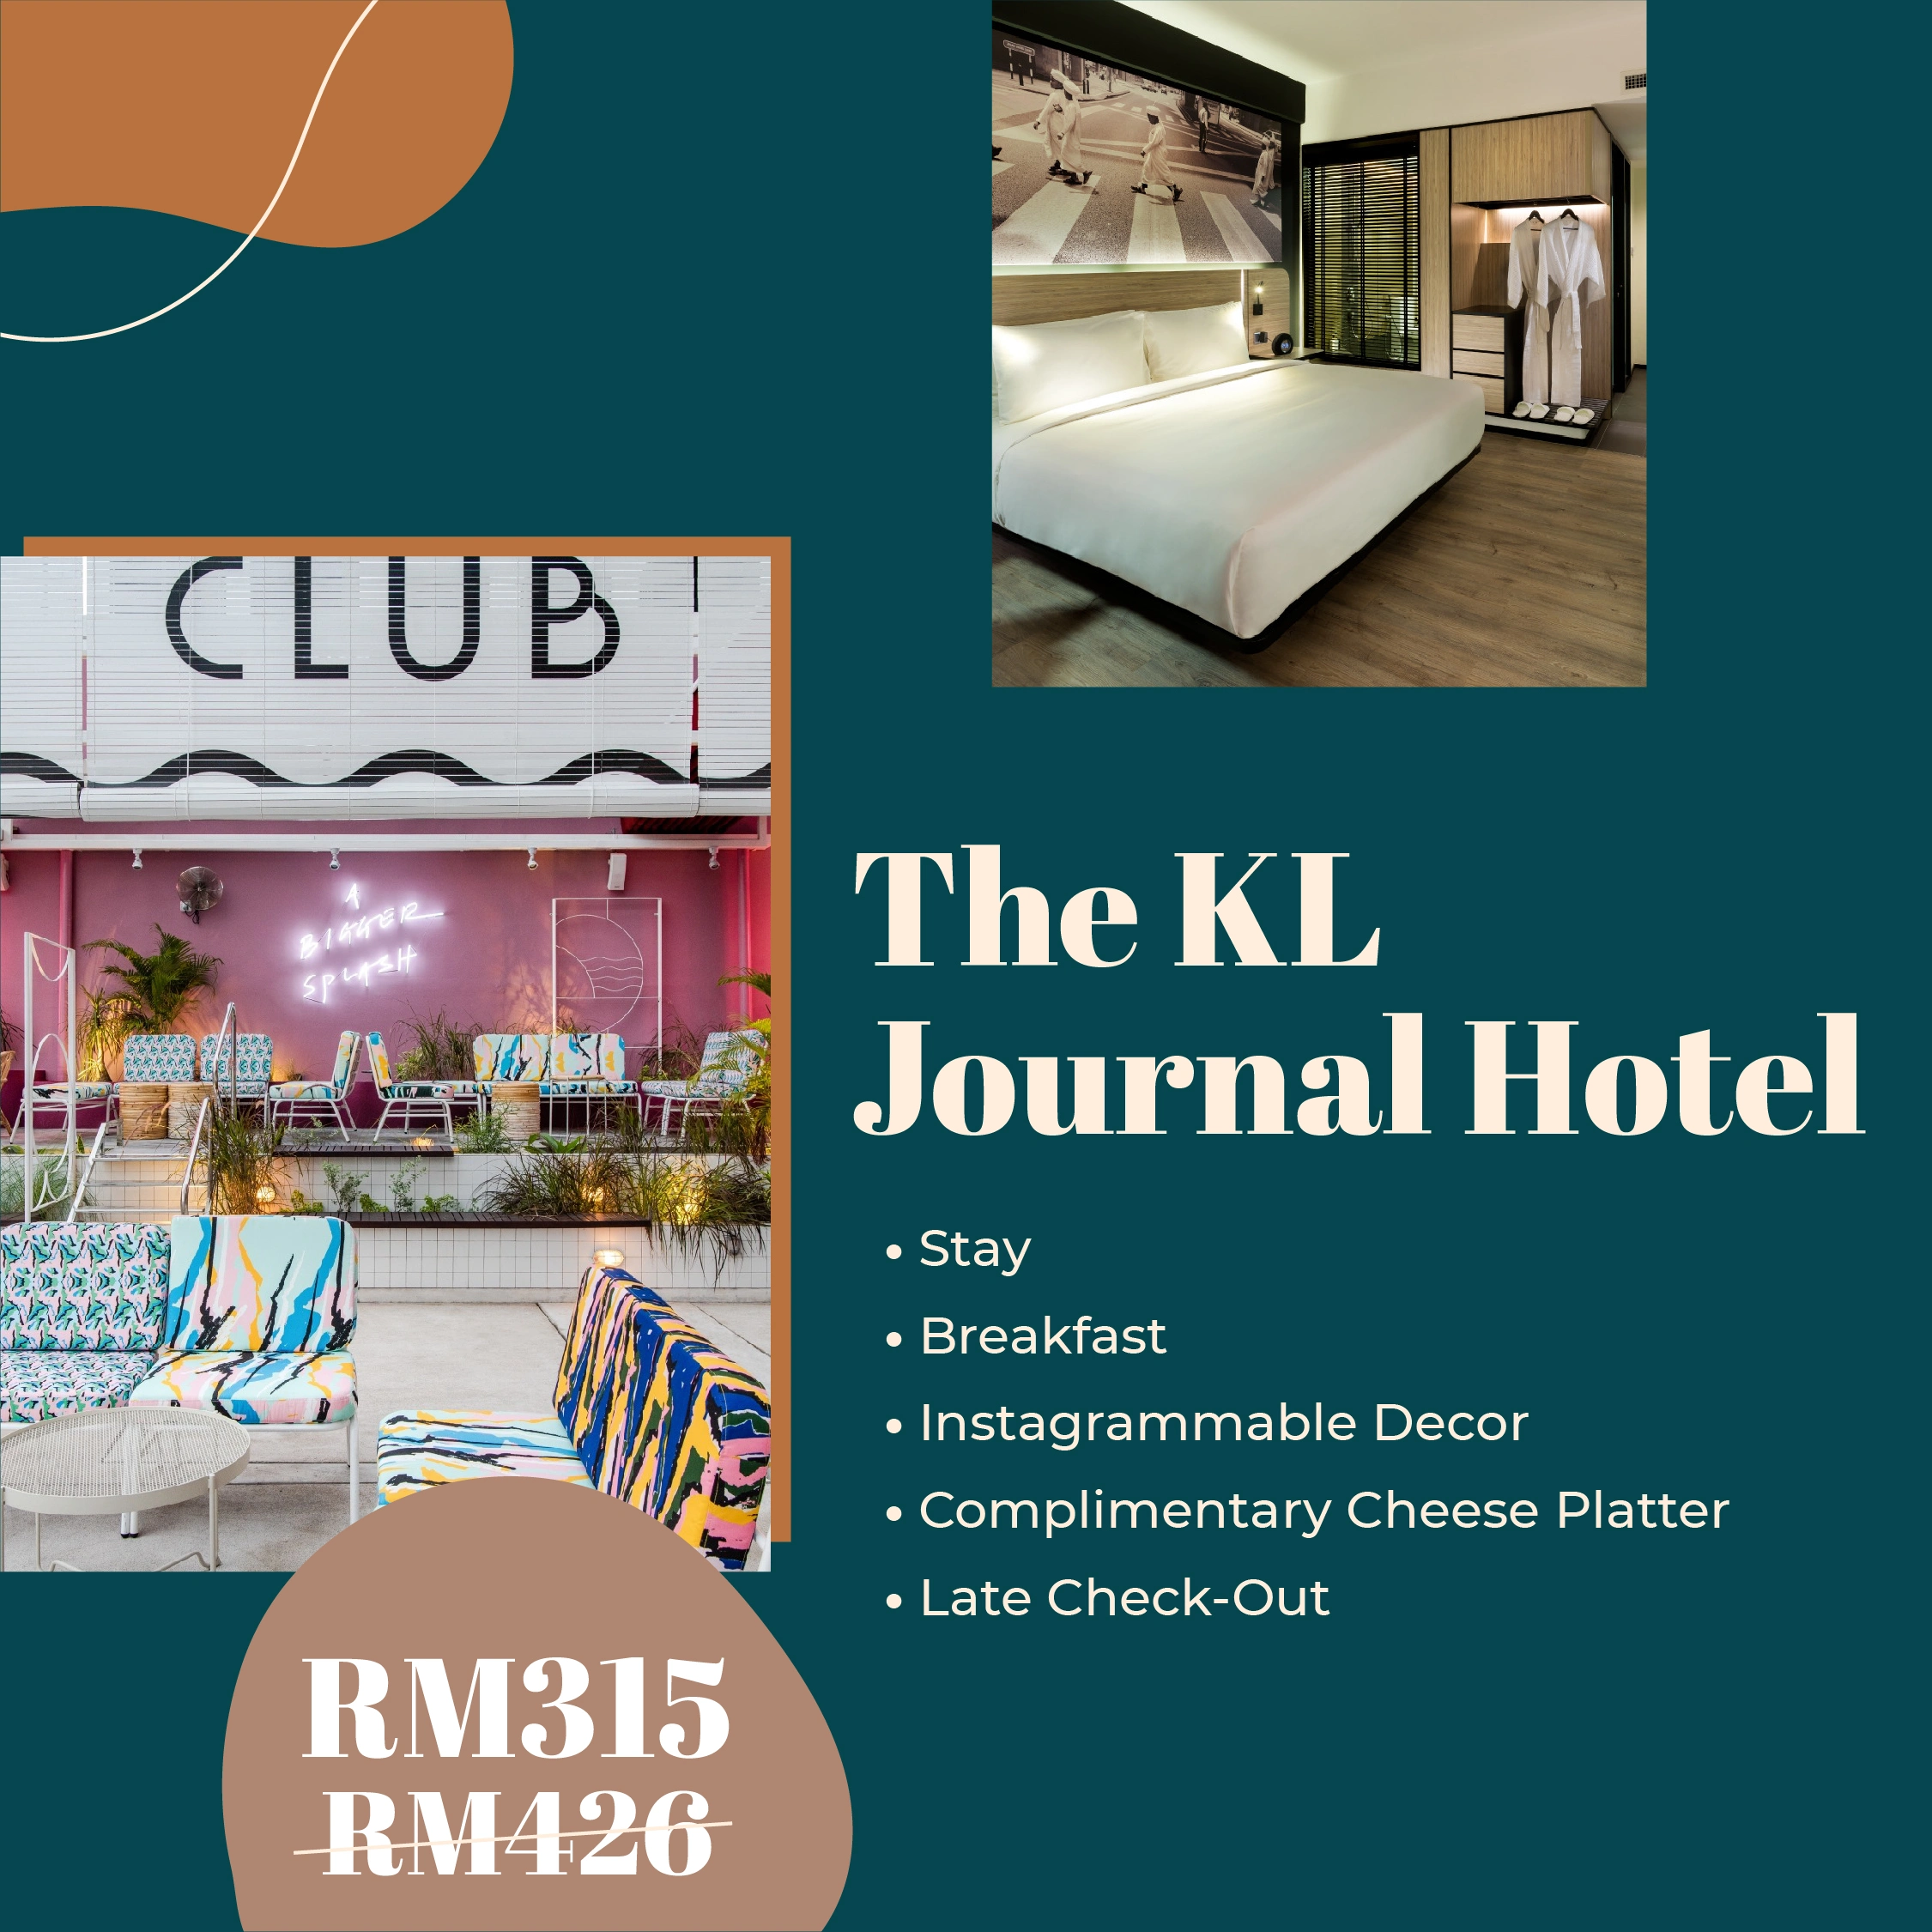 The KL Journal Hotel Klook Promo